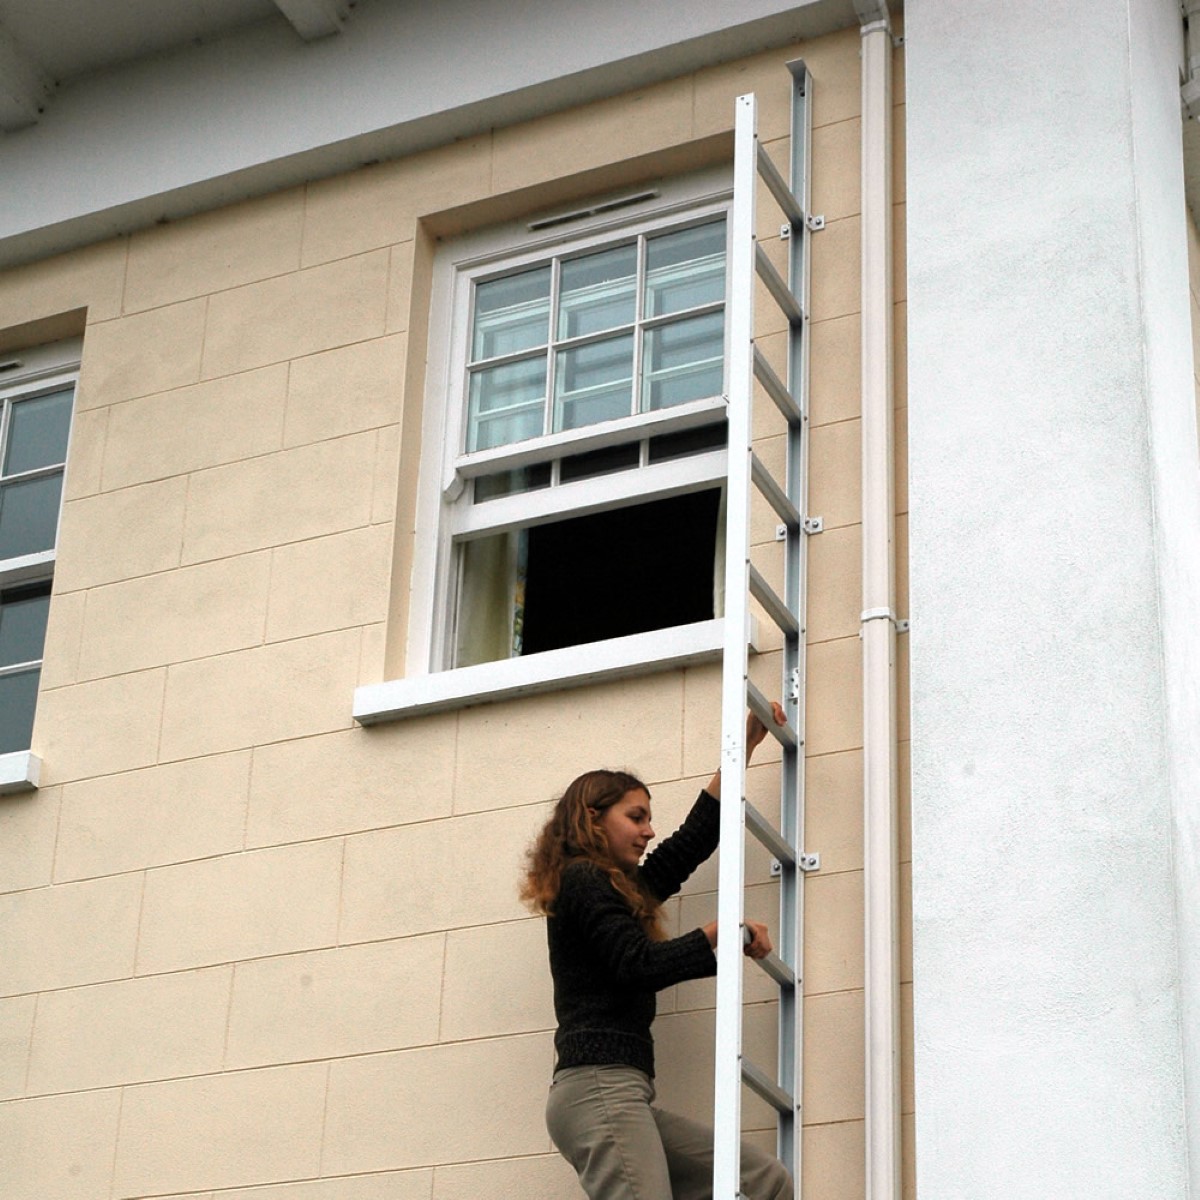 How To Use Fire Escape Ladder